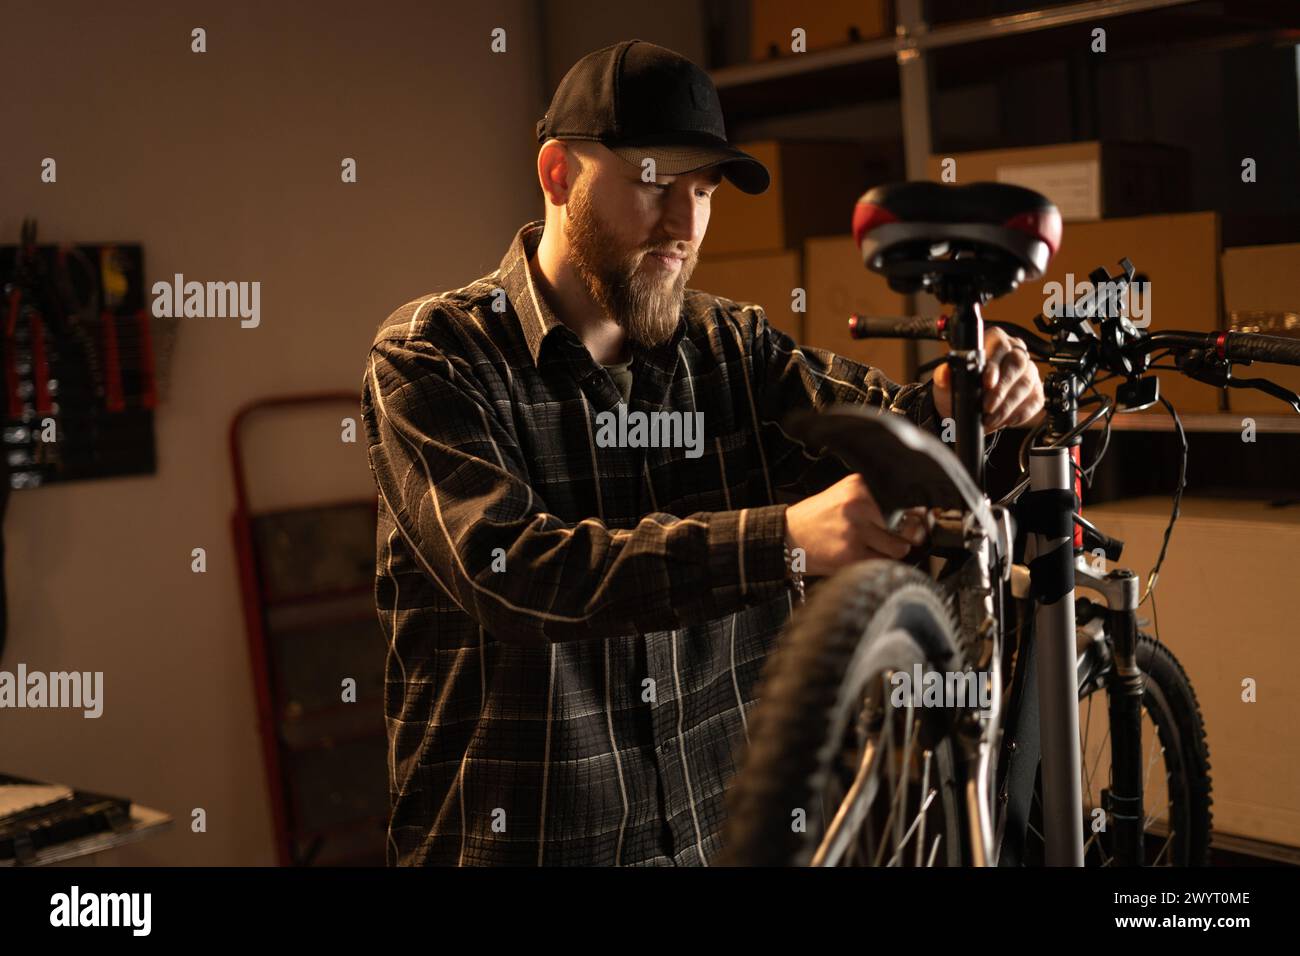 Handsome bearded mechanic repairing bicycles in a workshop or garage. Stock Photo